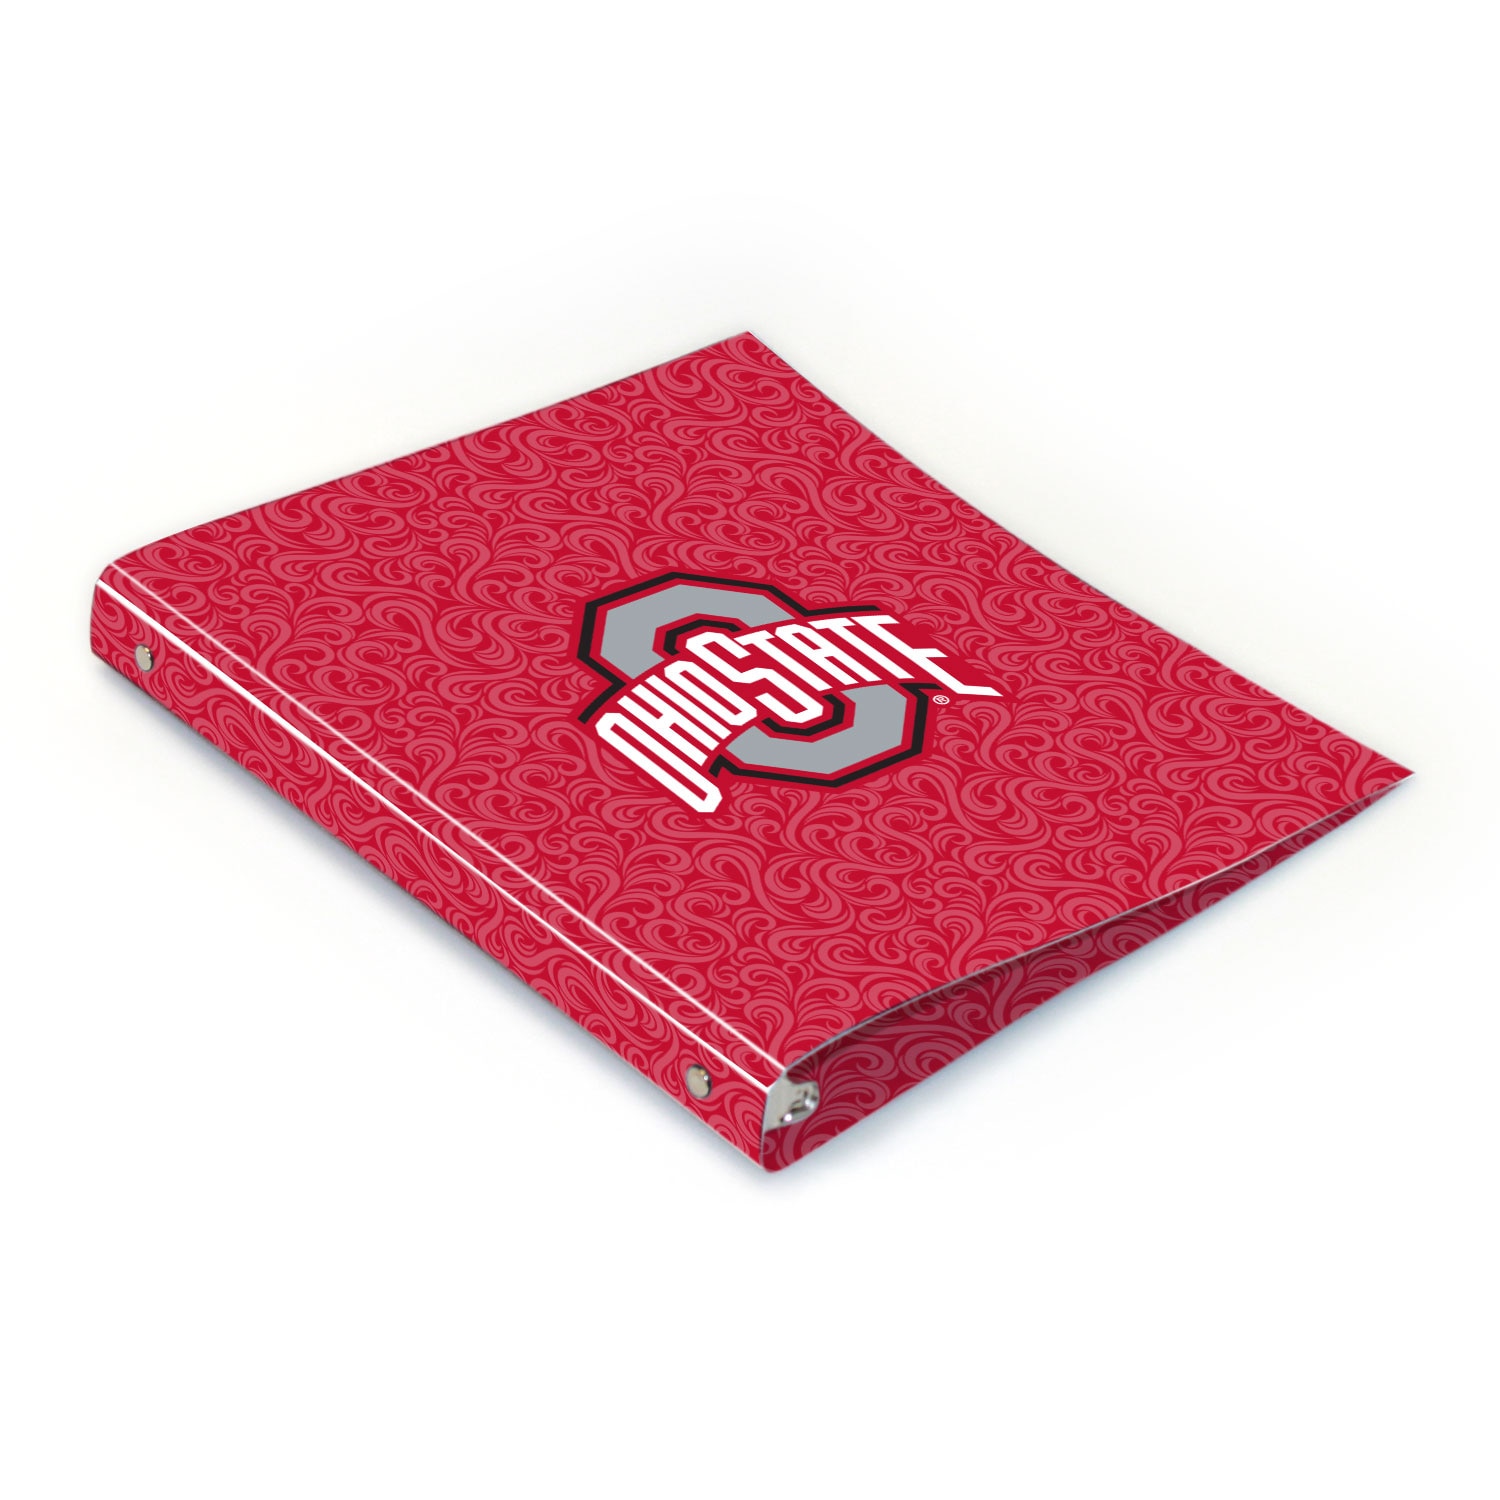 Ohio State Full Color 2 sided Imprinted Flexible 1" Logo 1 Binder 10.5" x 11.5"